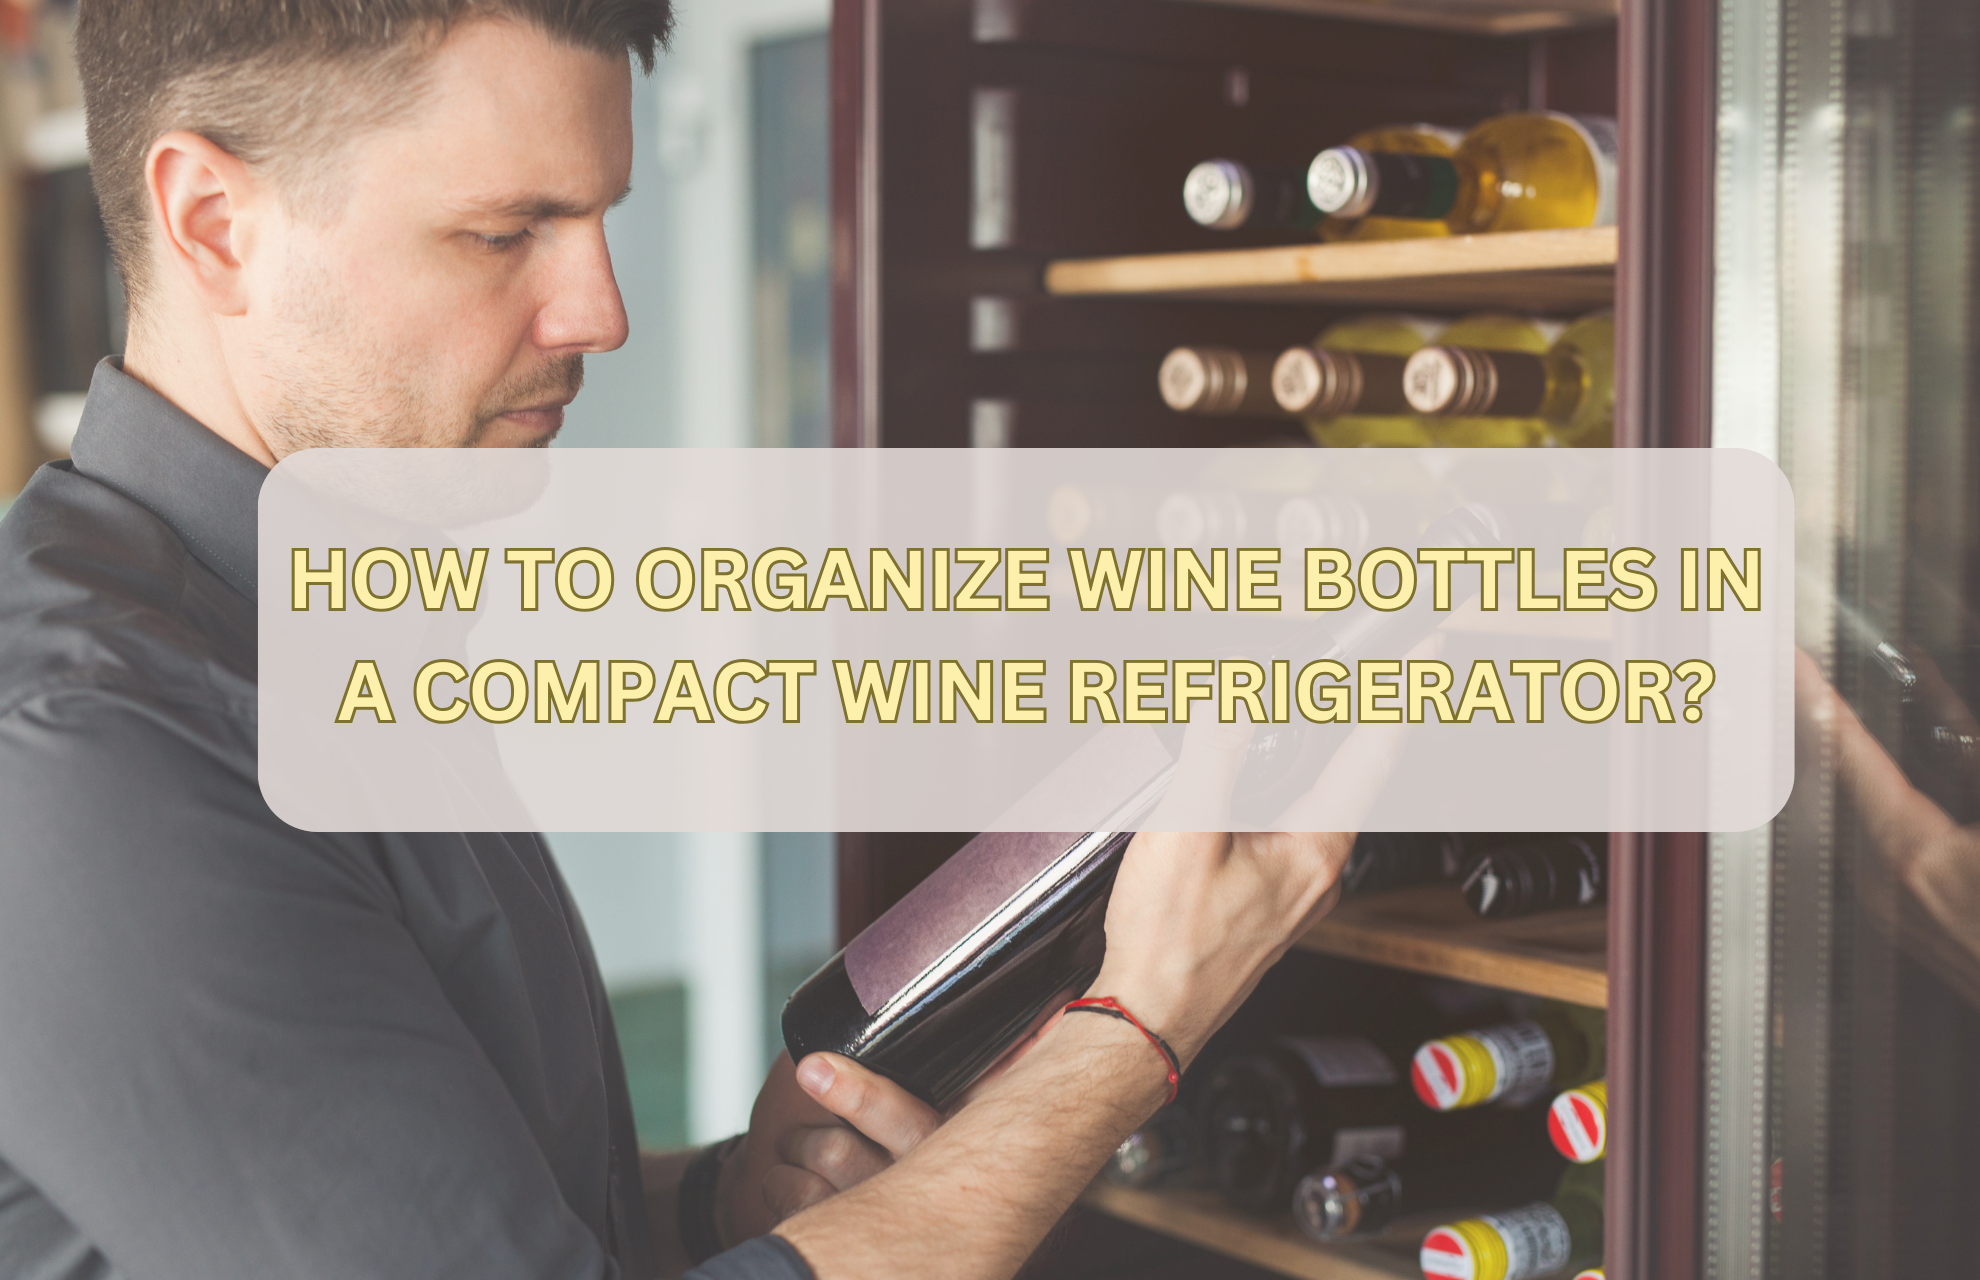 HOW TO ORGANIZE WINE BOTTLES IN A COMPACT WINE REFRIGERATOR?